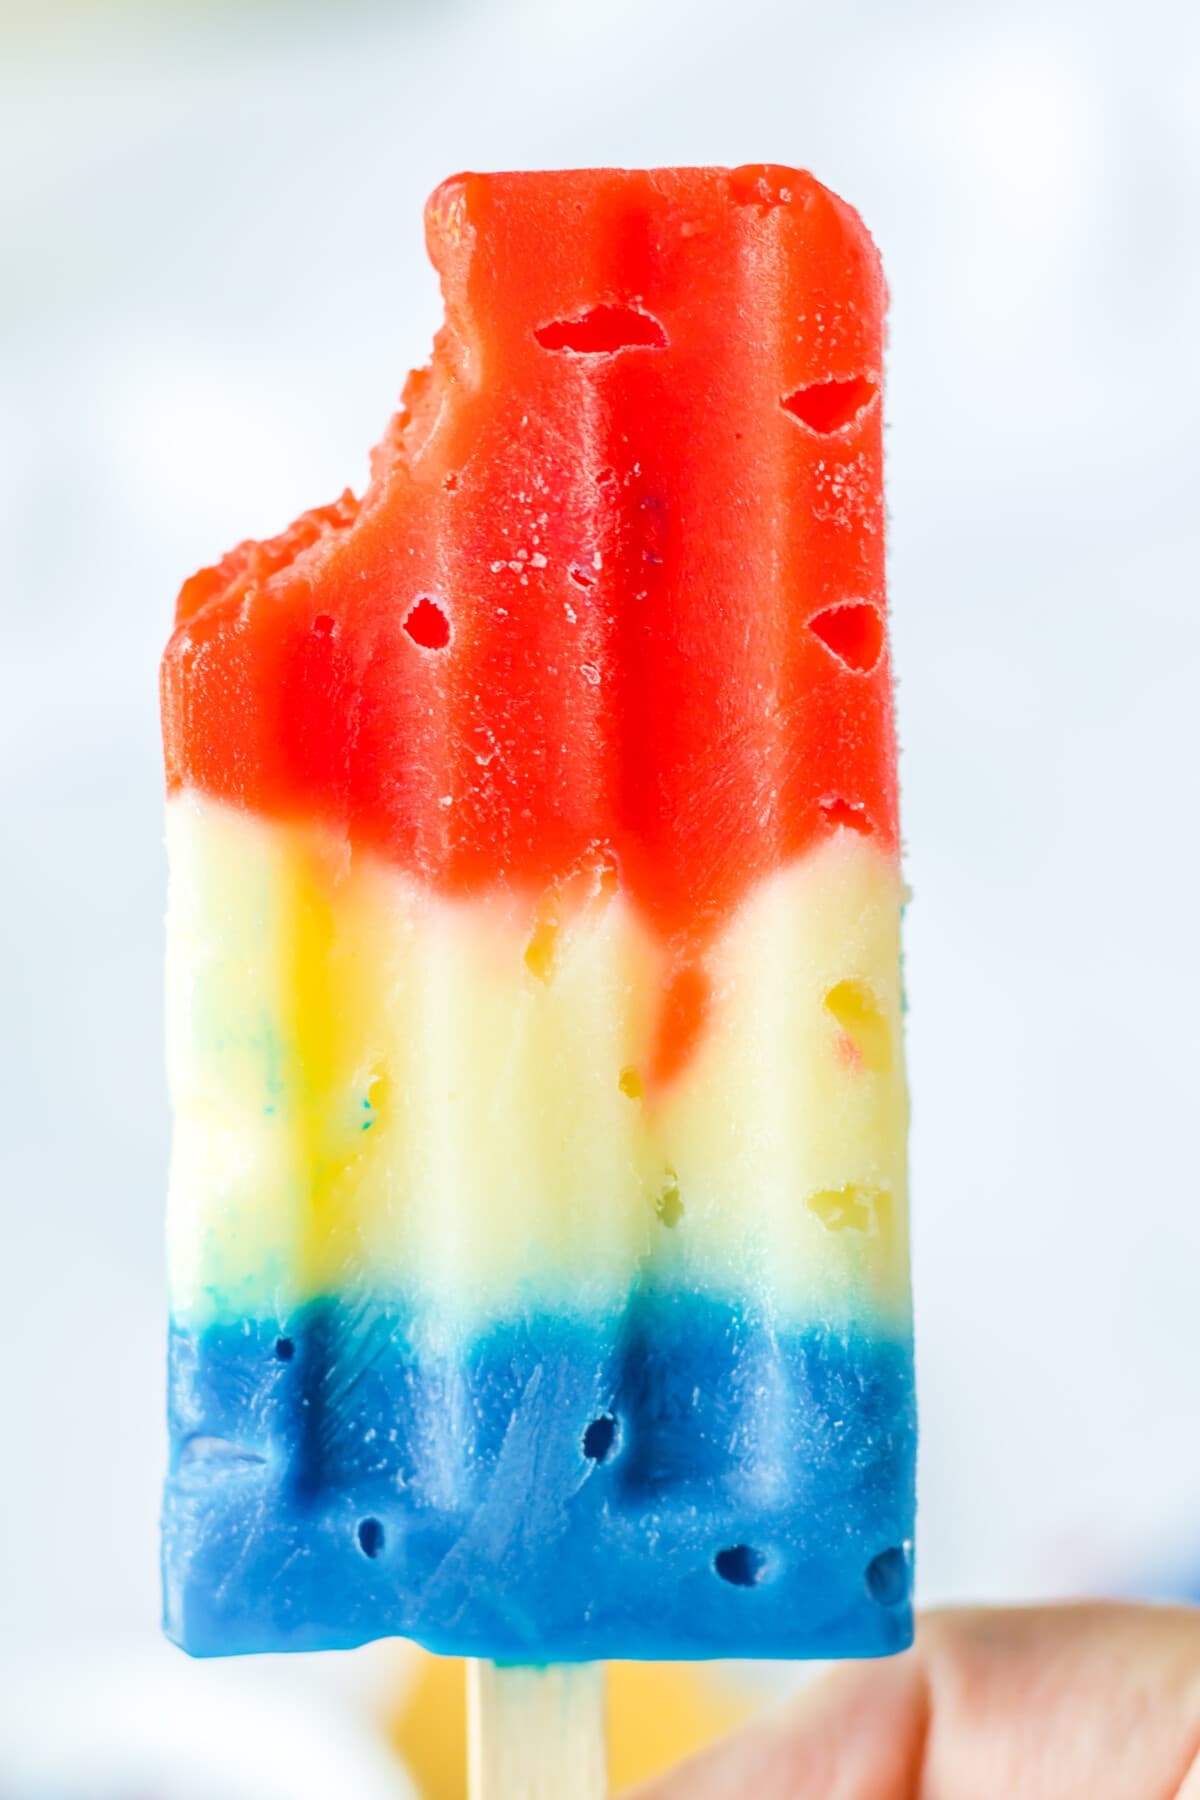 Red White and Blue Popsicles with a bite taken out